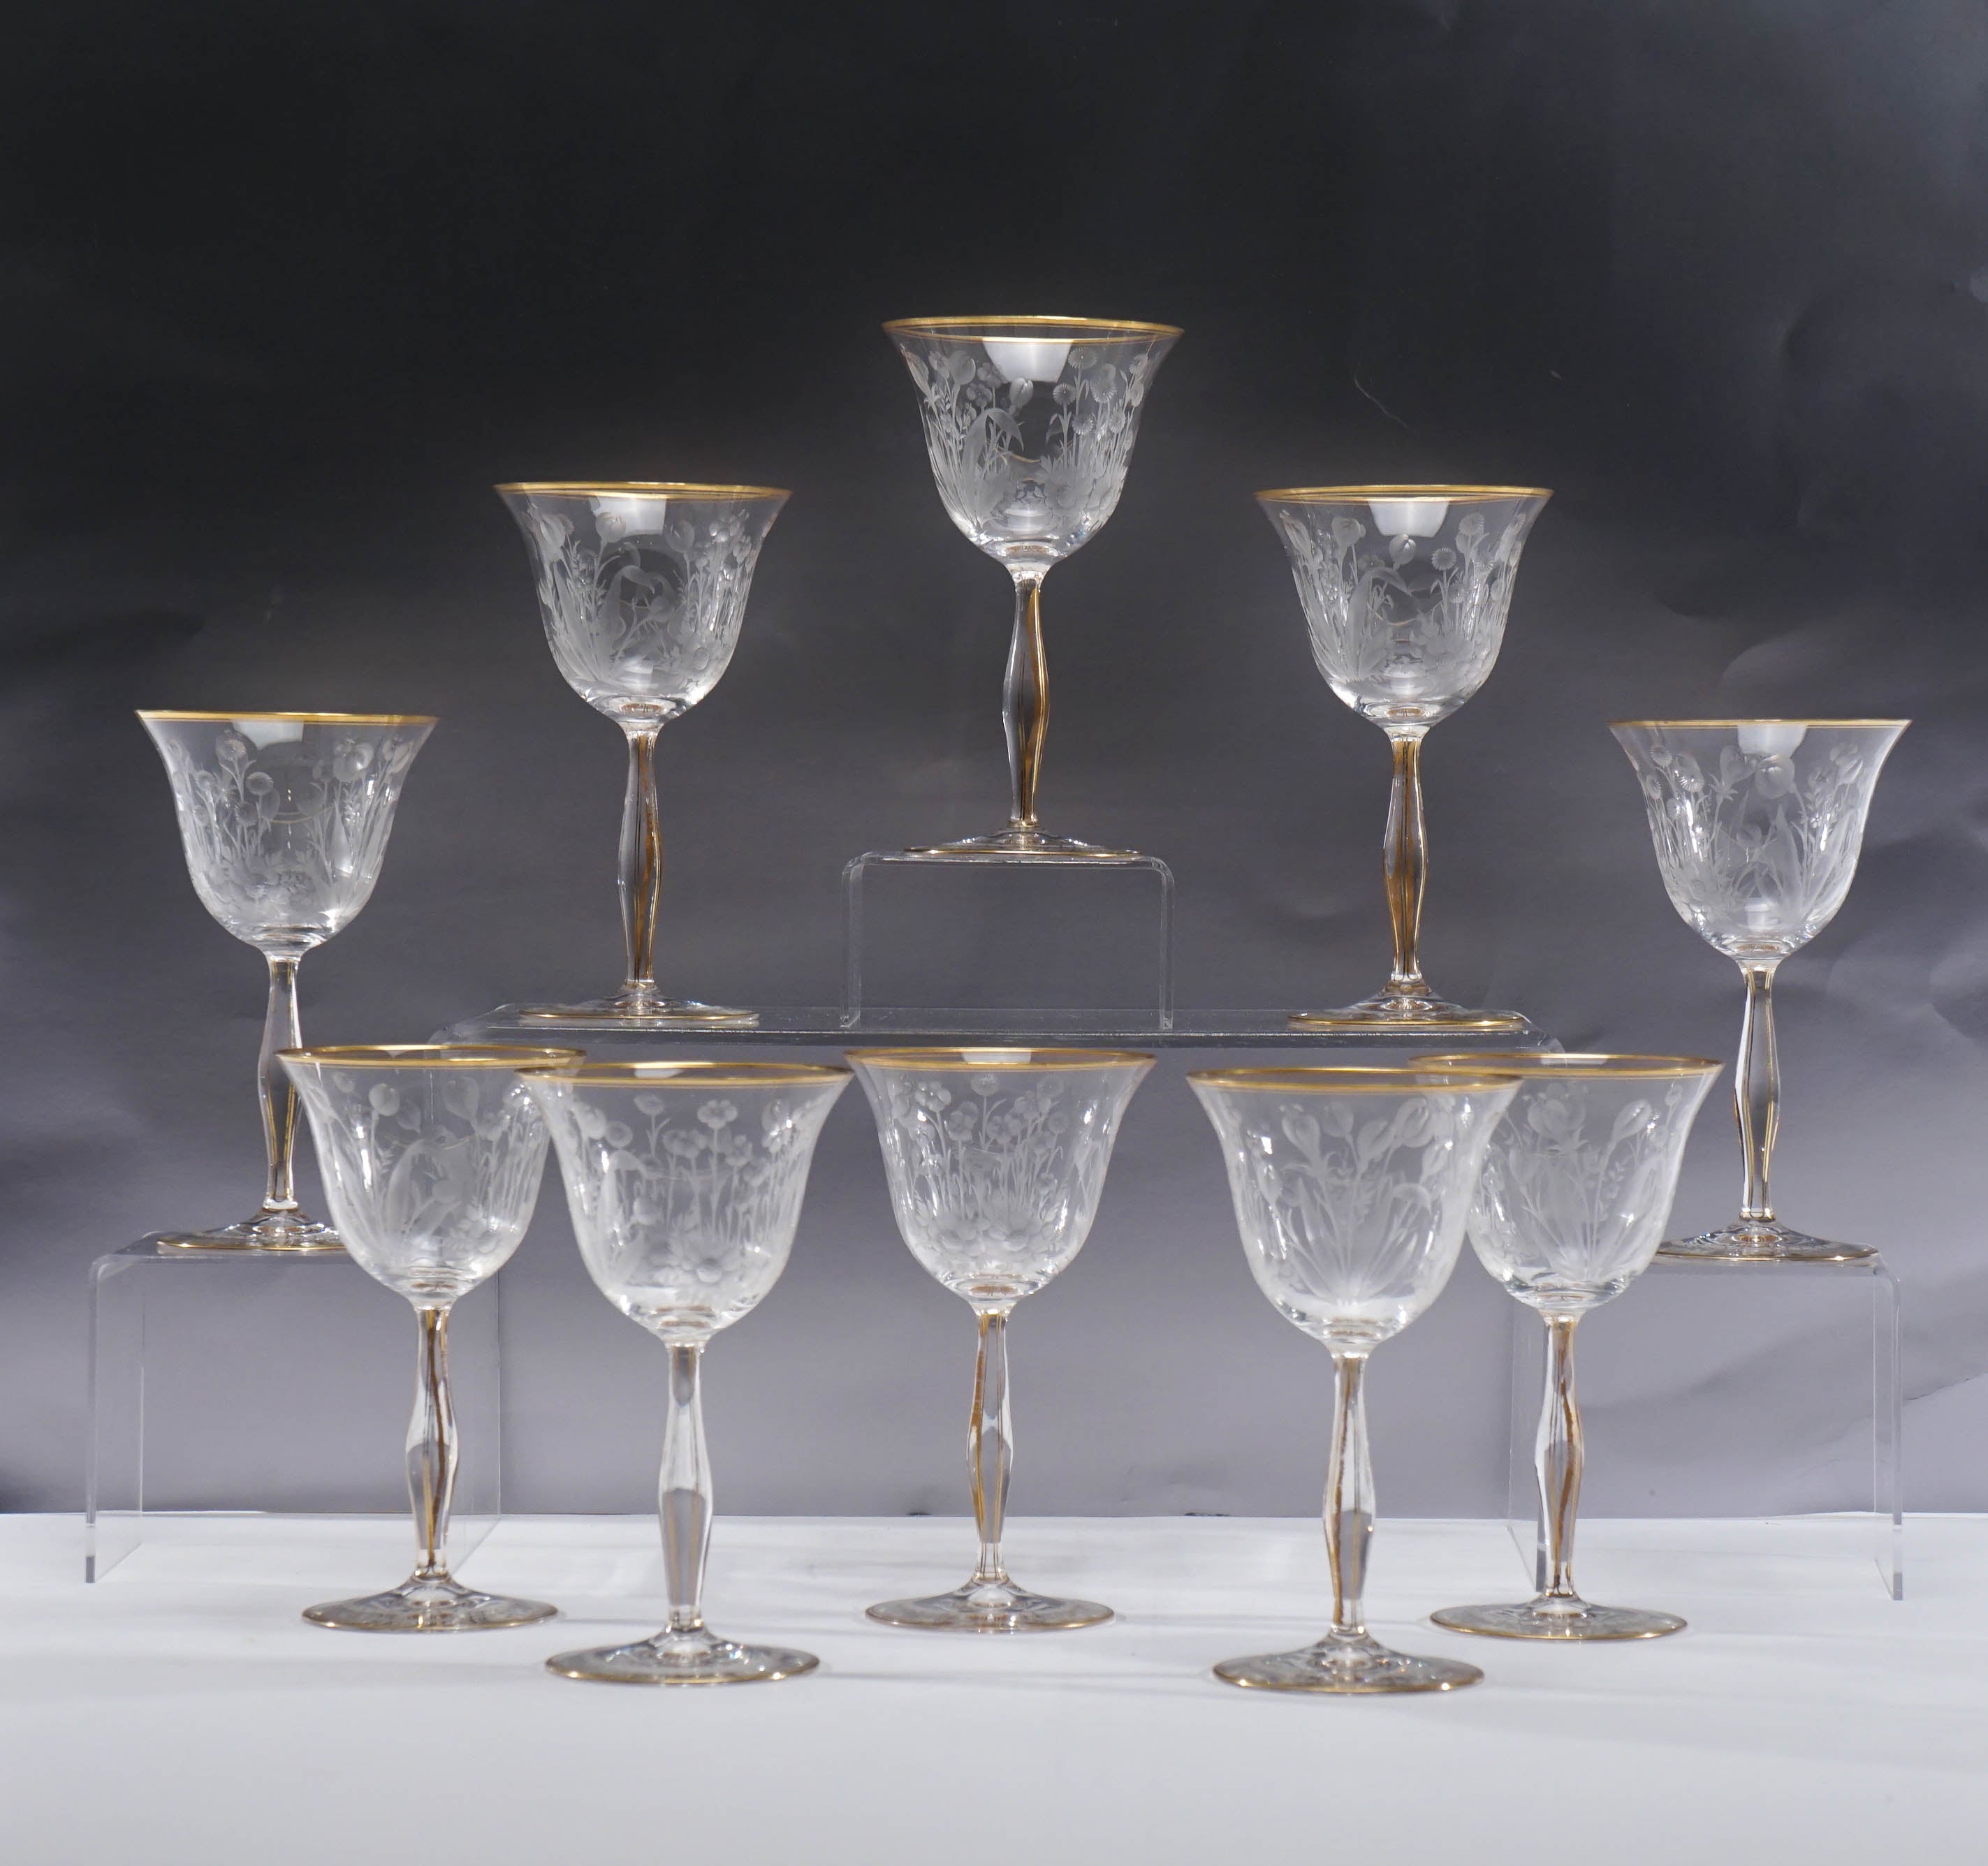 This set of 10 tall and elegant hand blown crystal wine goblets feature a masterfully wheel cut Art Nouveau floral motif. Standing 6 3/4